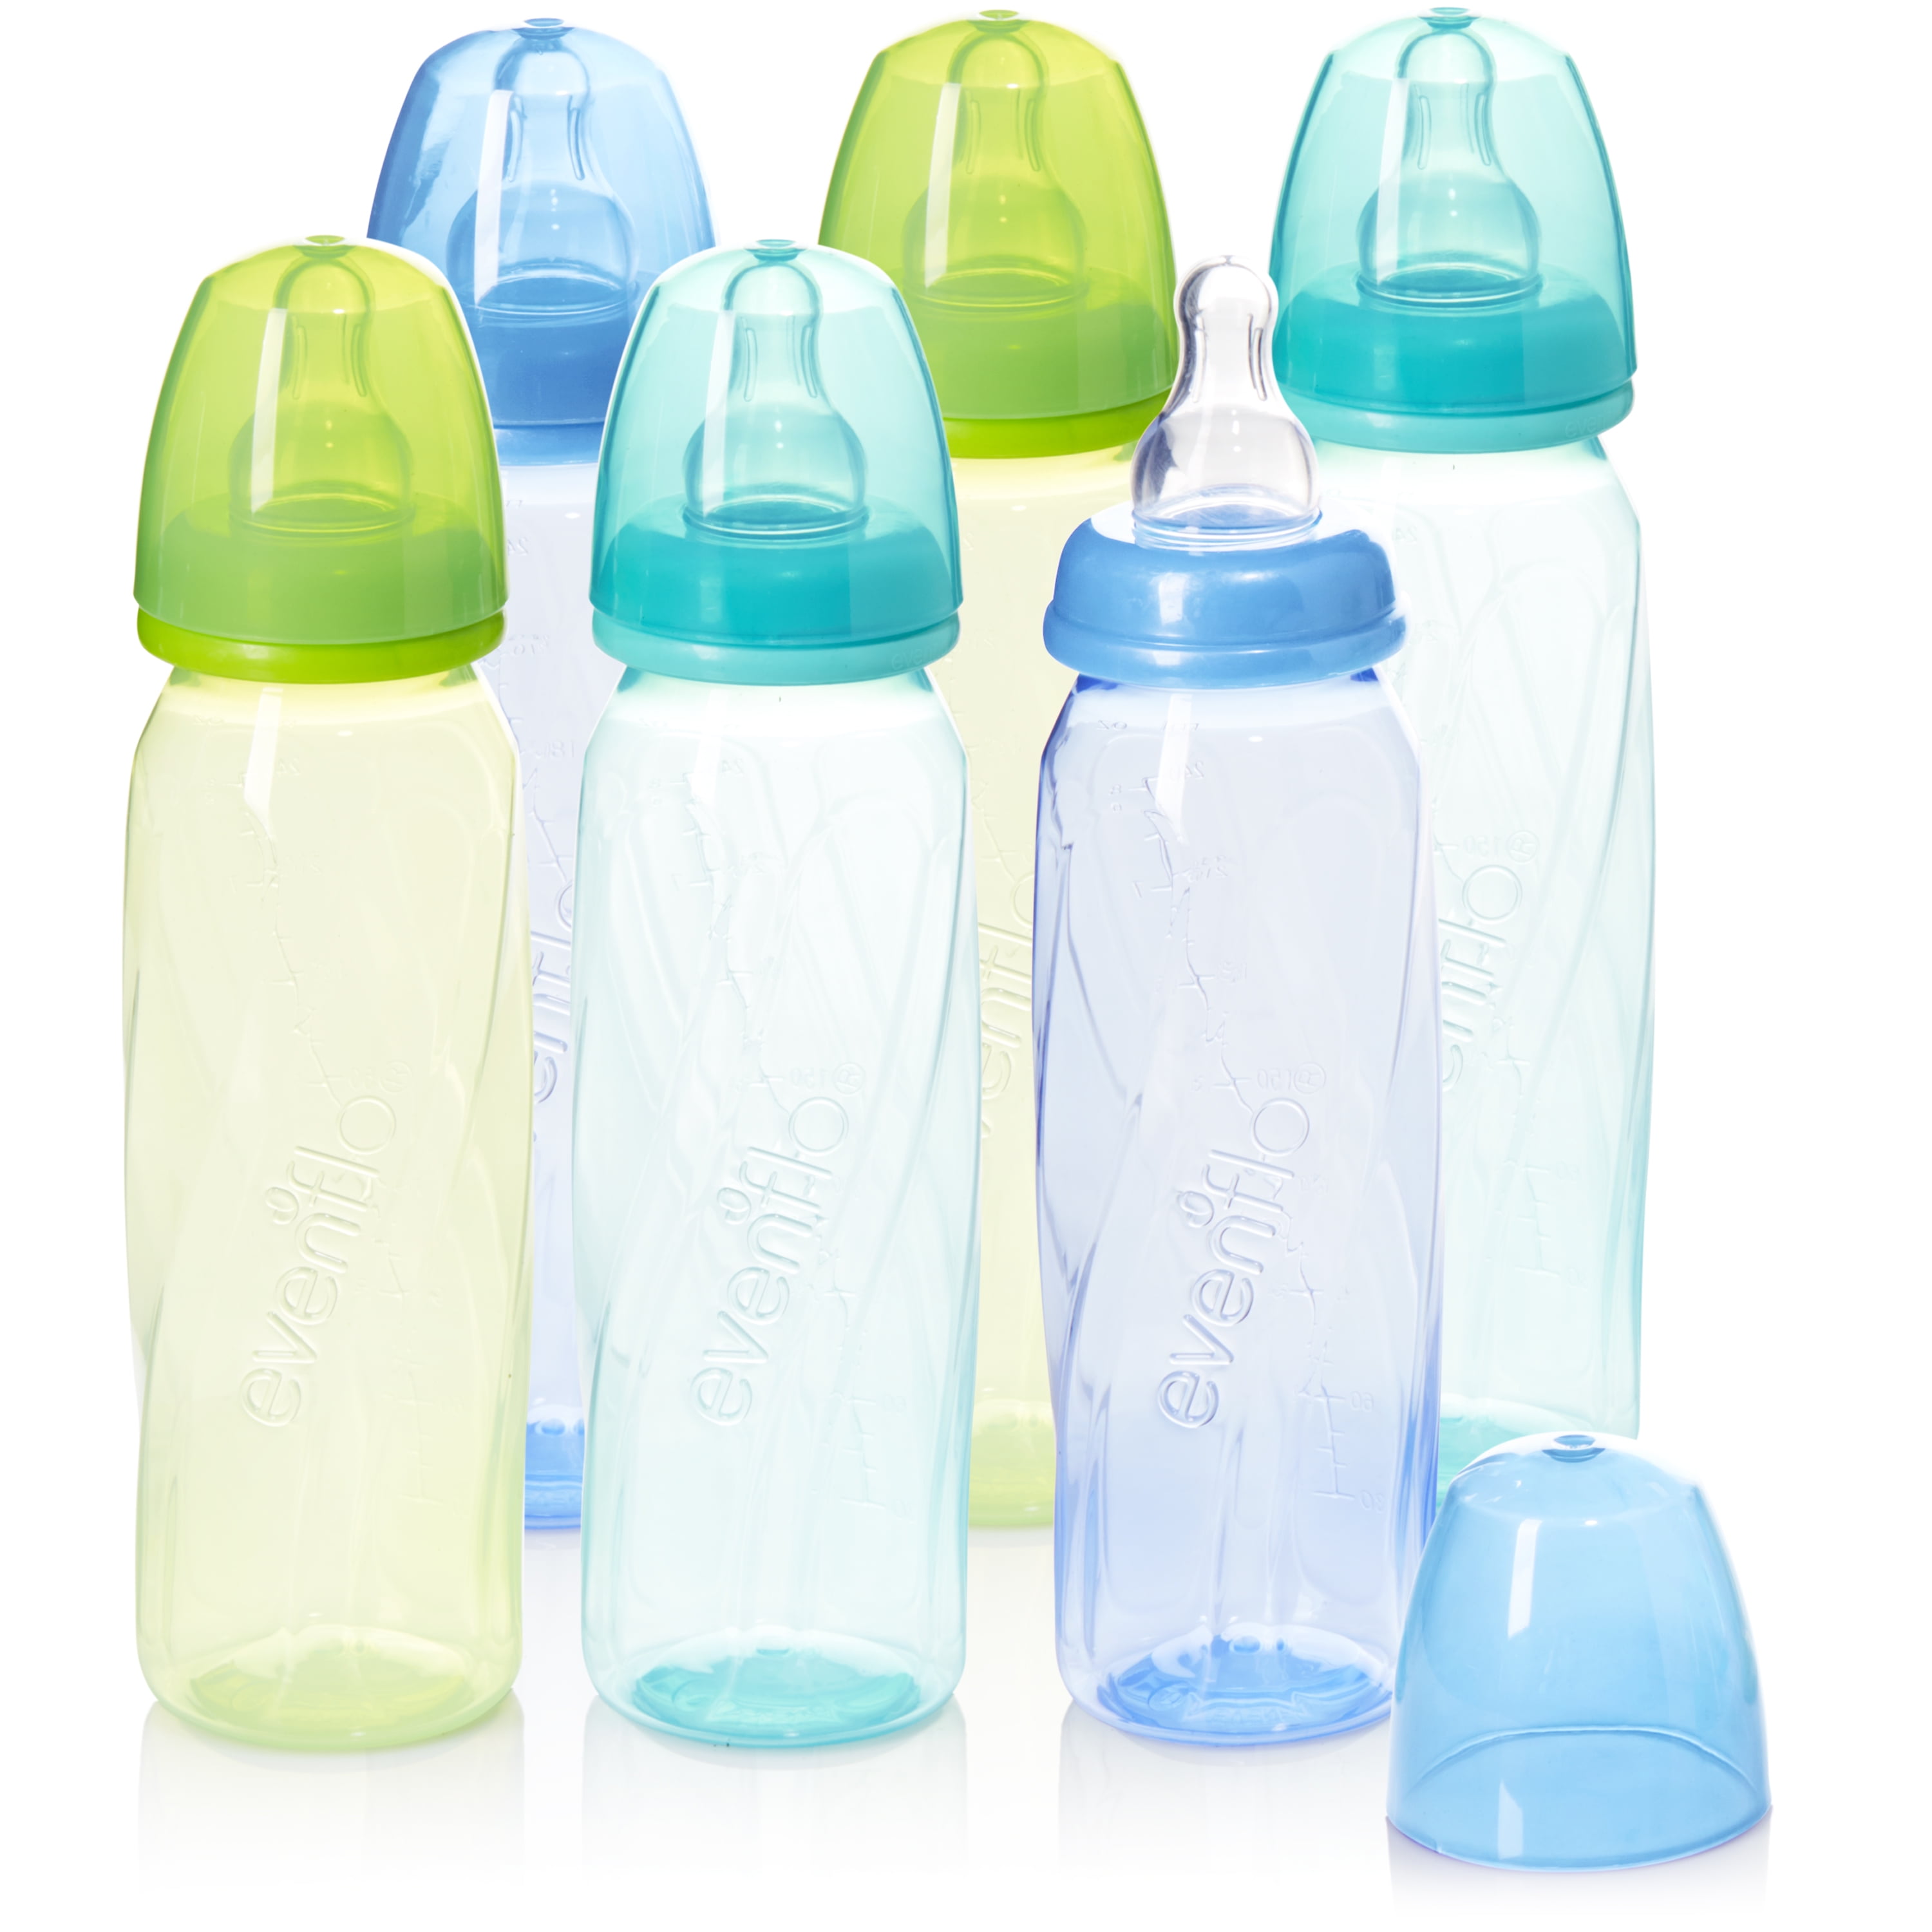 Picture Of Baby Bottles Inflatable Baby Bottle Abby Nals1990